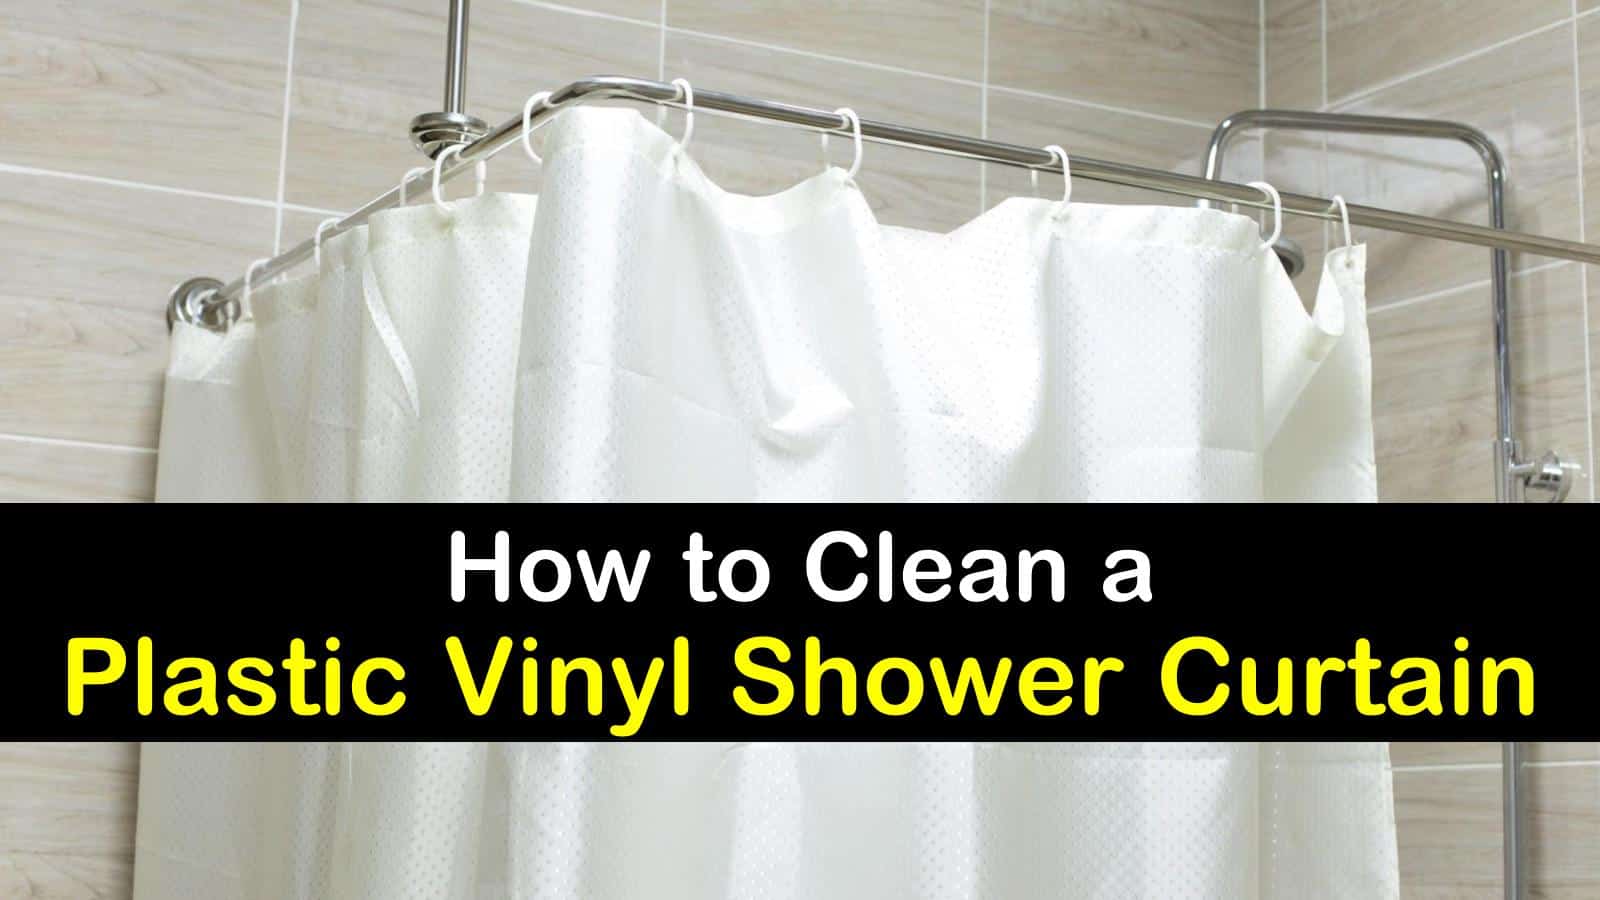 11 Excellent Ways to Clean a Shower Curtain